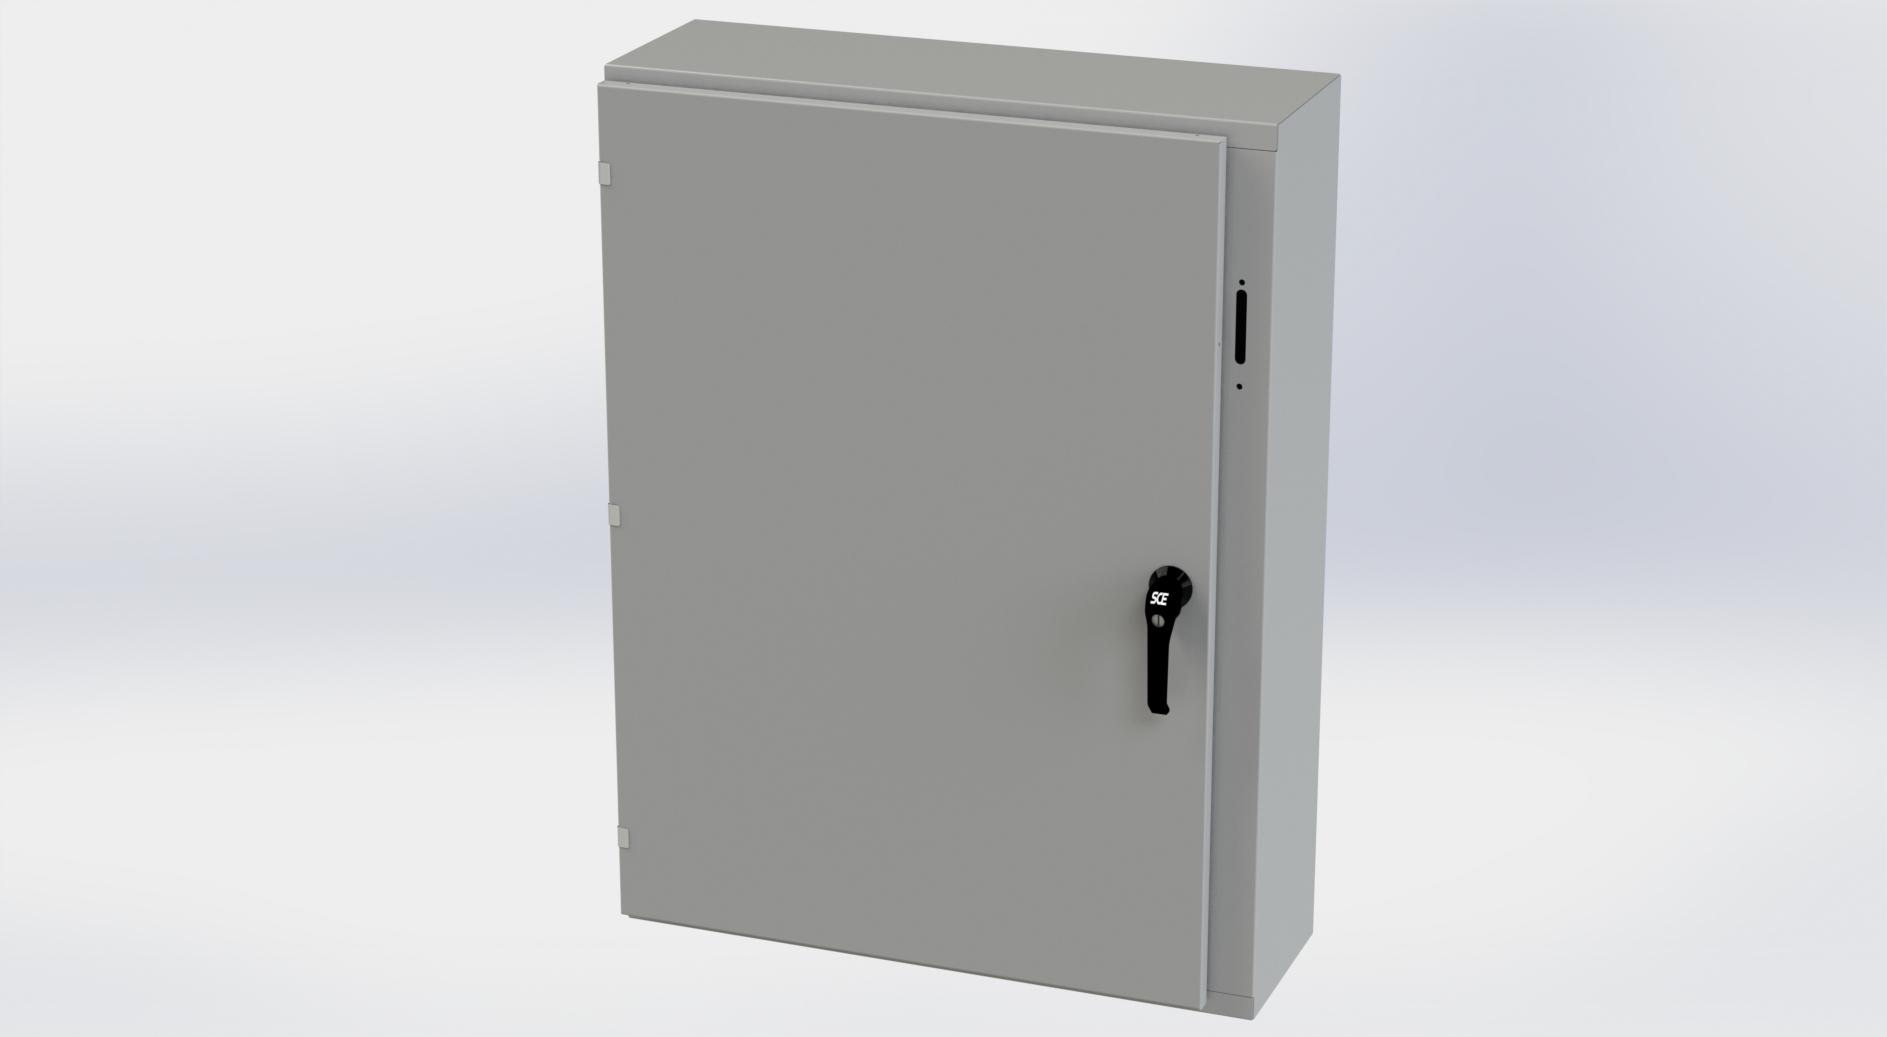 Saginaw Control SCE-42XEL3110LP XEL LP Enclosure, Height:42.00", Width:31.38", Depth:10.00", ANSI-61 gray powder coating inside and out. Optional sub-panels are powder coated white.